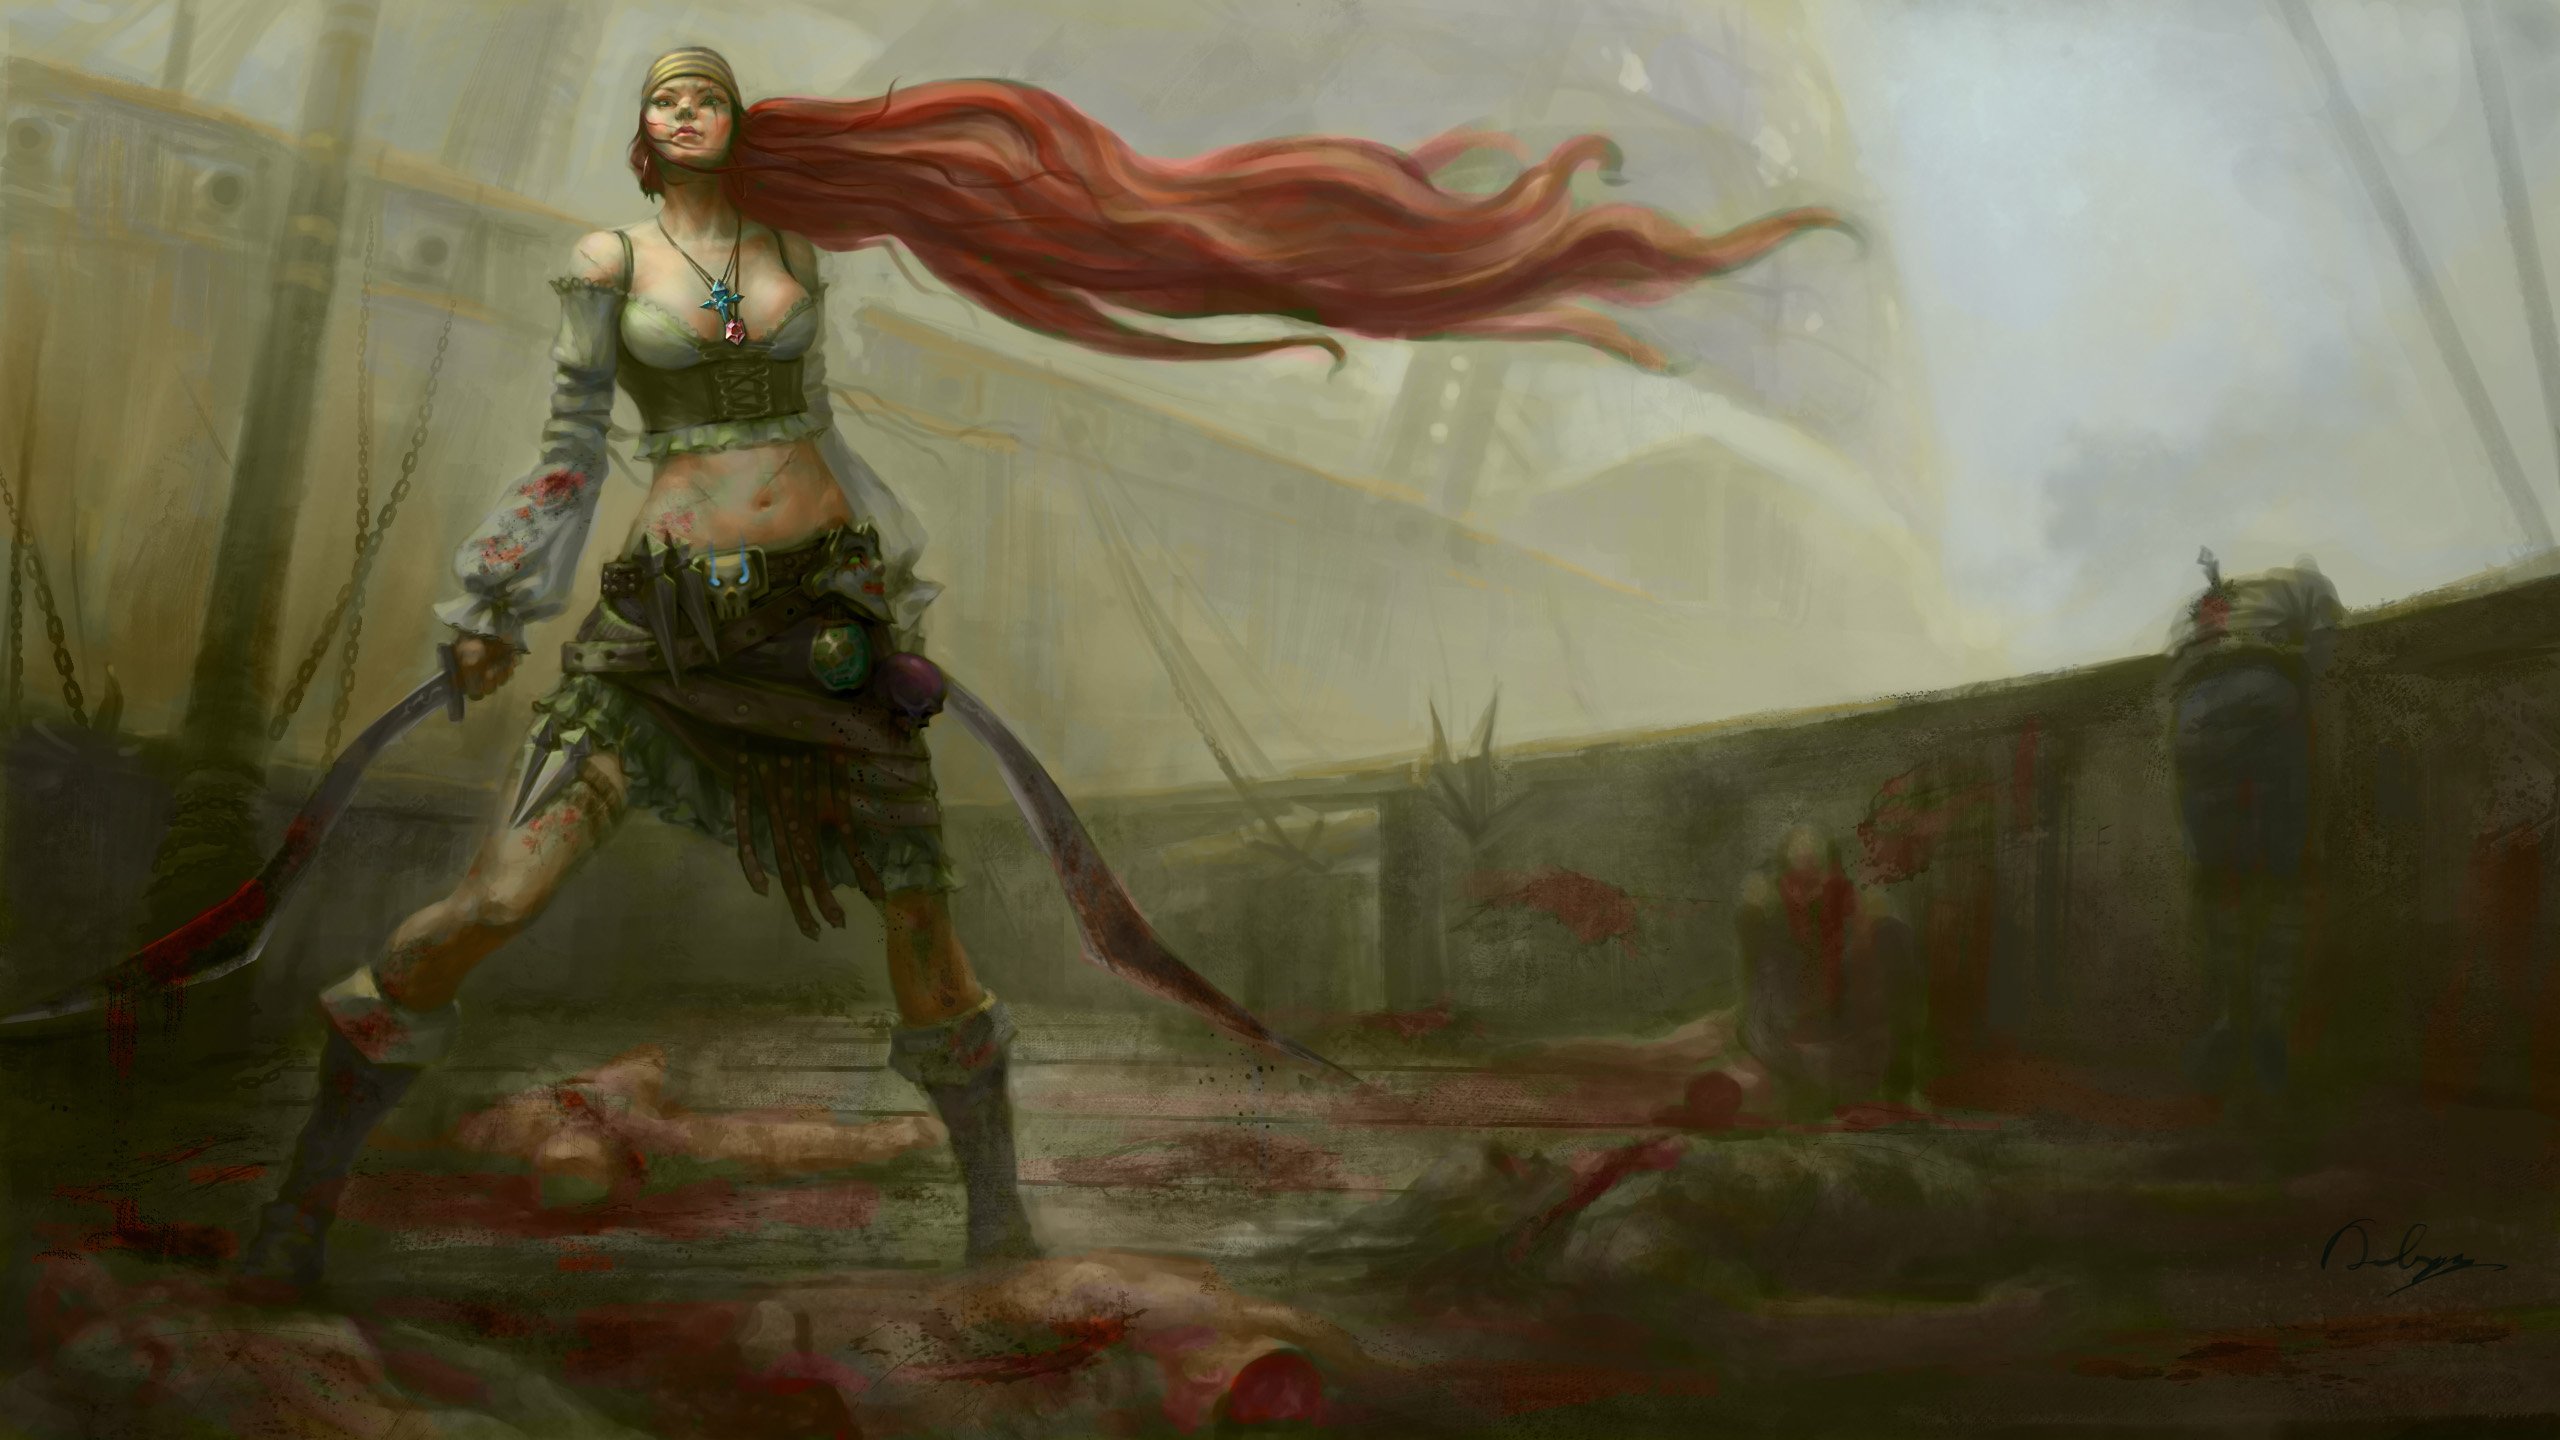 video, Games, Redheads, Pirates, League, Of, Legends, Long, Hair, Weapons, Artwork, Katarina, The, Sinister, Blade, Blades Wallpaper